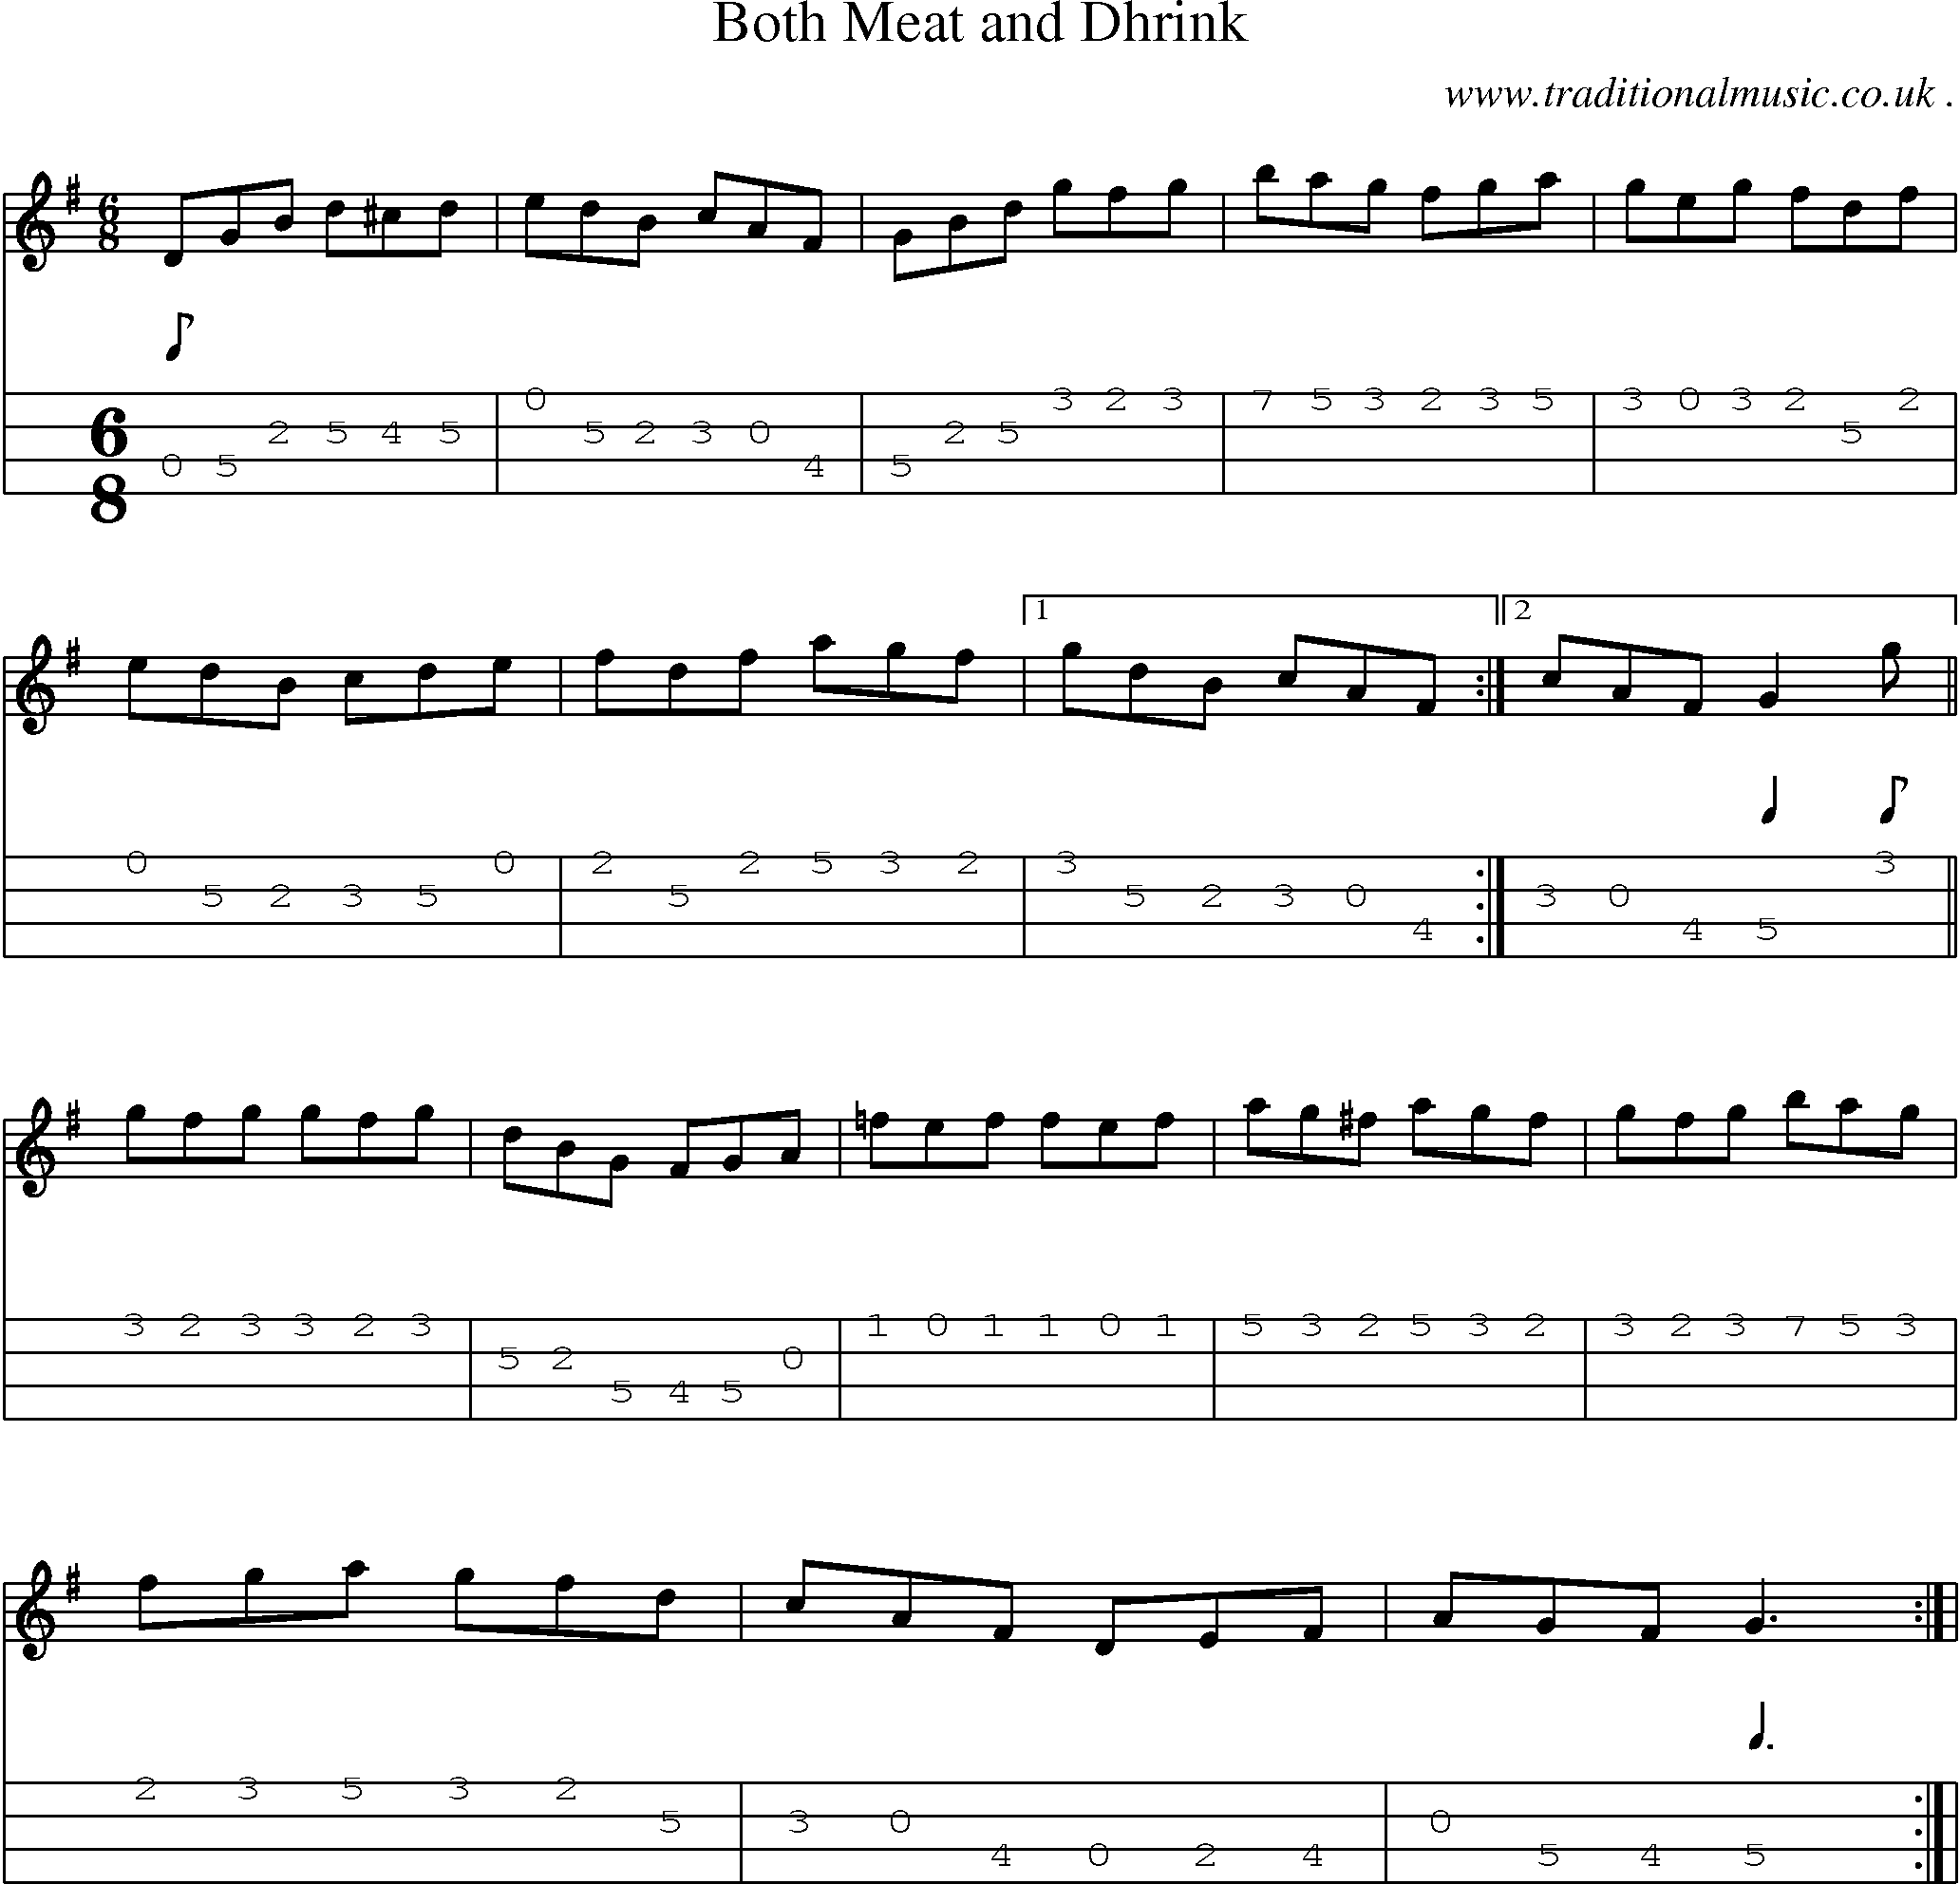 Sheet-Music and Mandolin Tabs for Both Meat And Dhrink